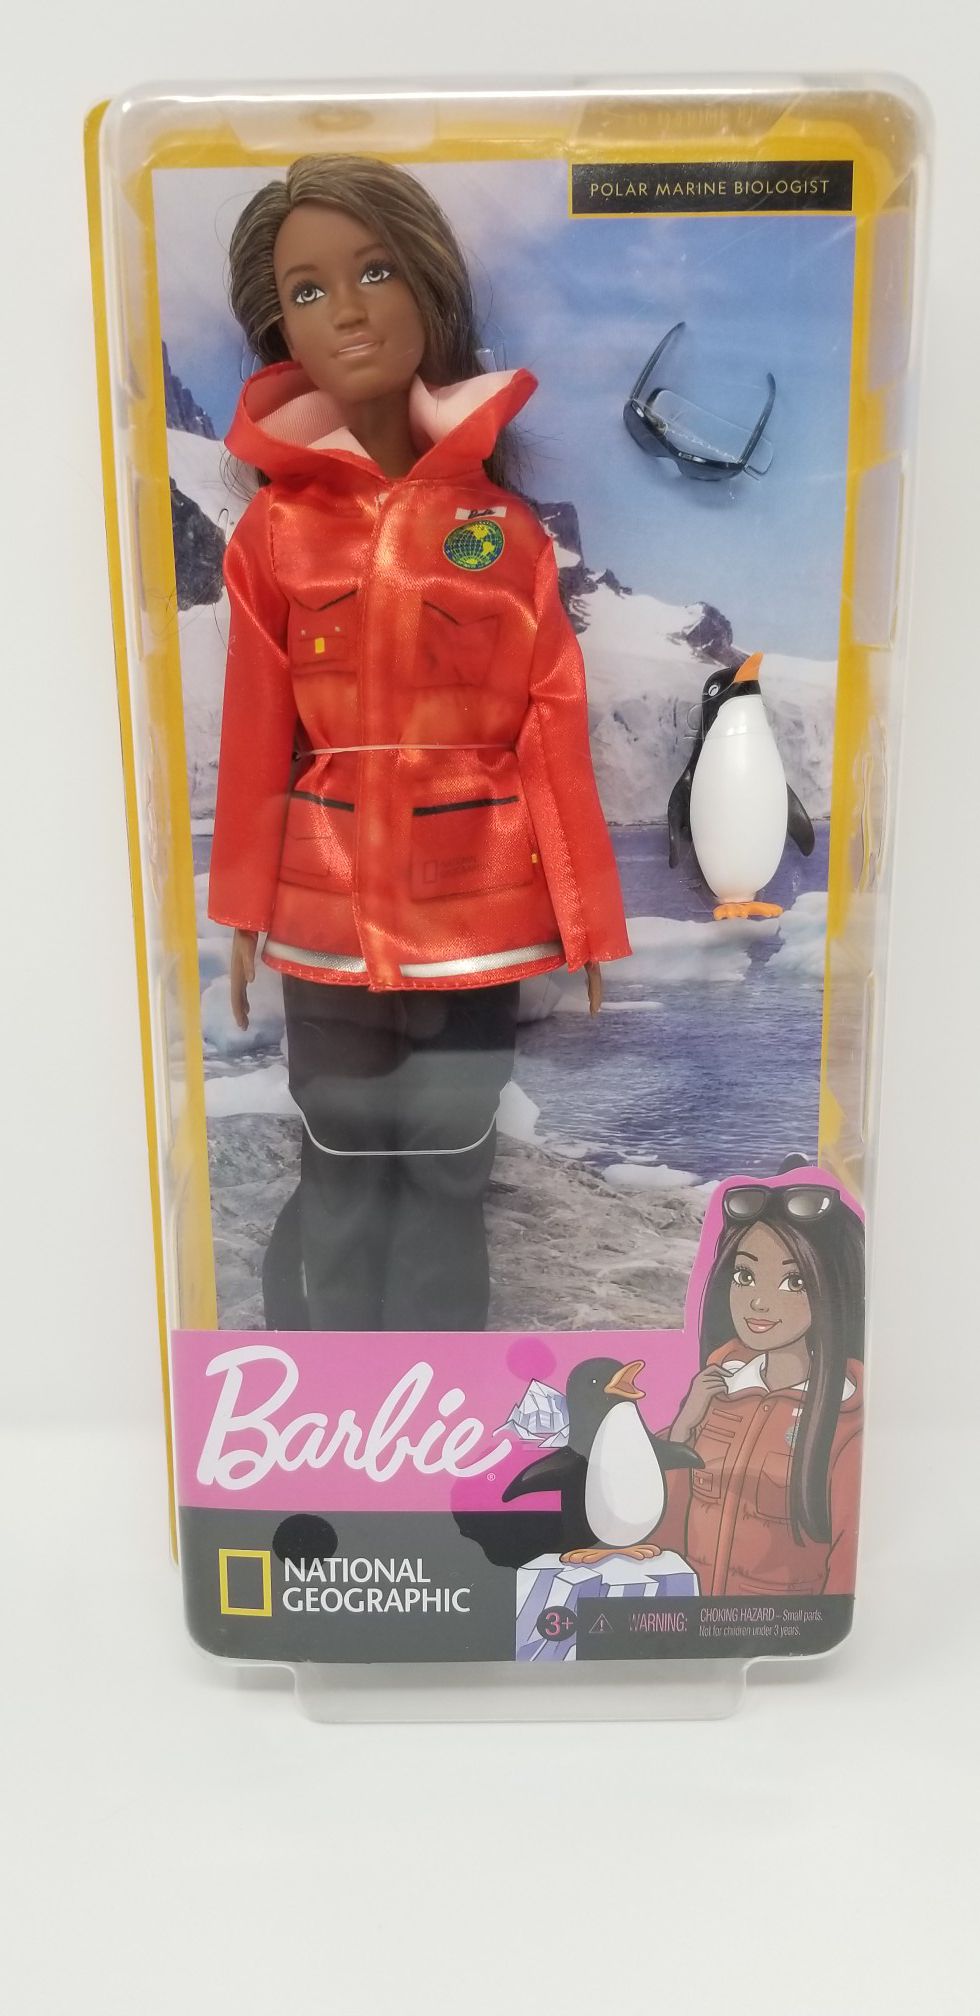 Career Barbie National Geographic AA Polar Marine Biologist You can be anything